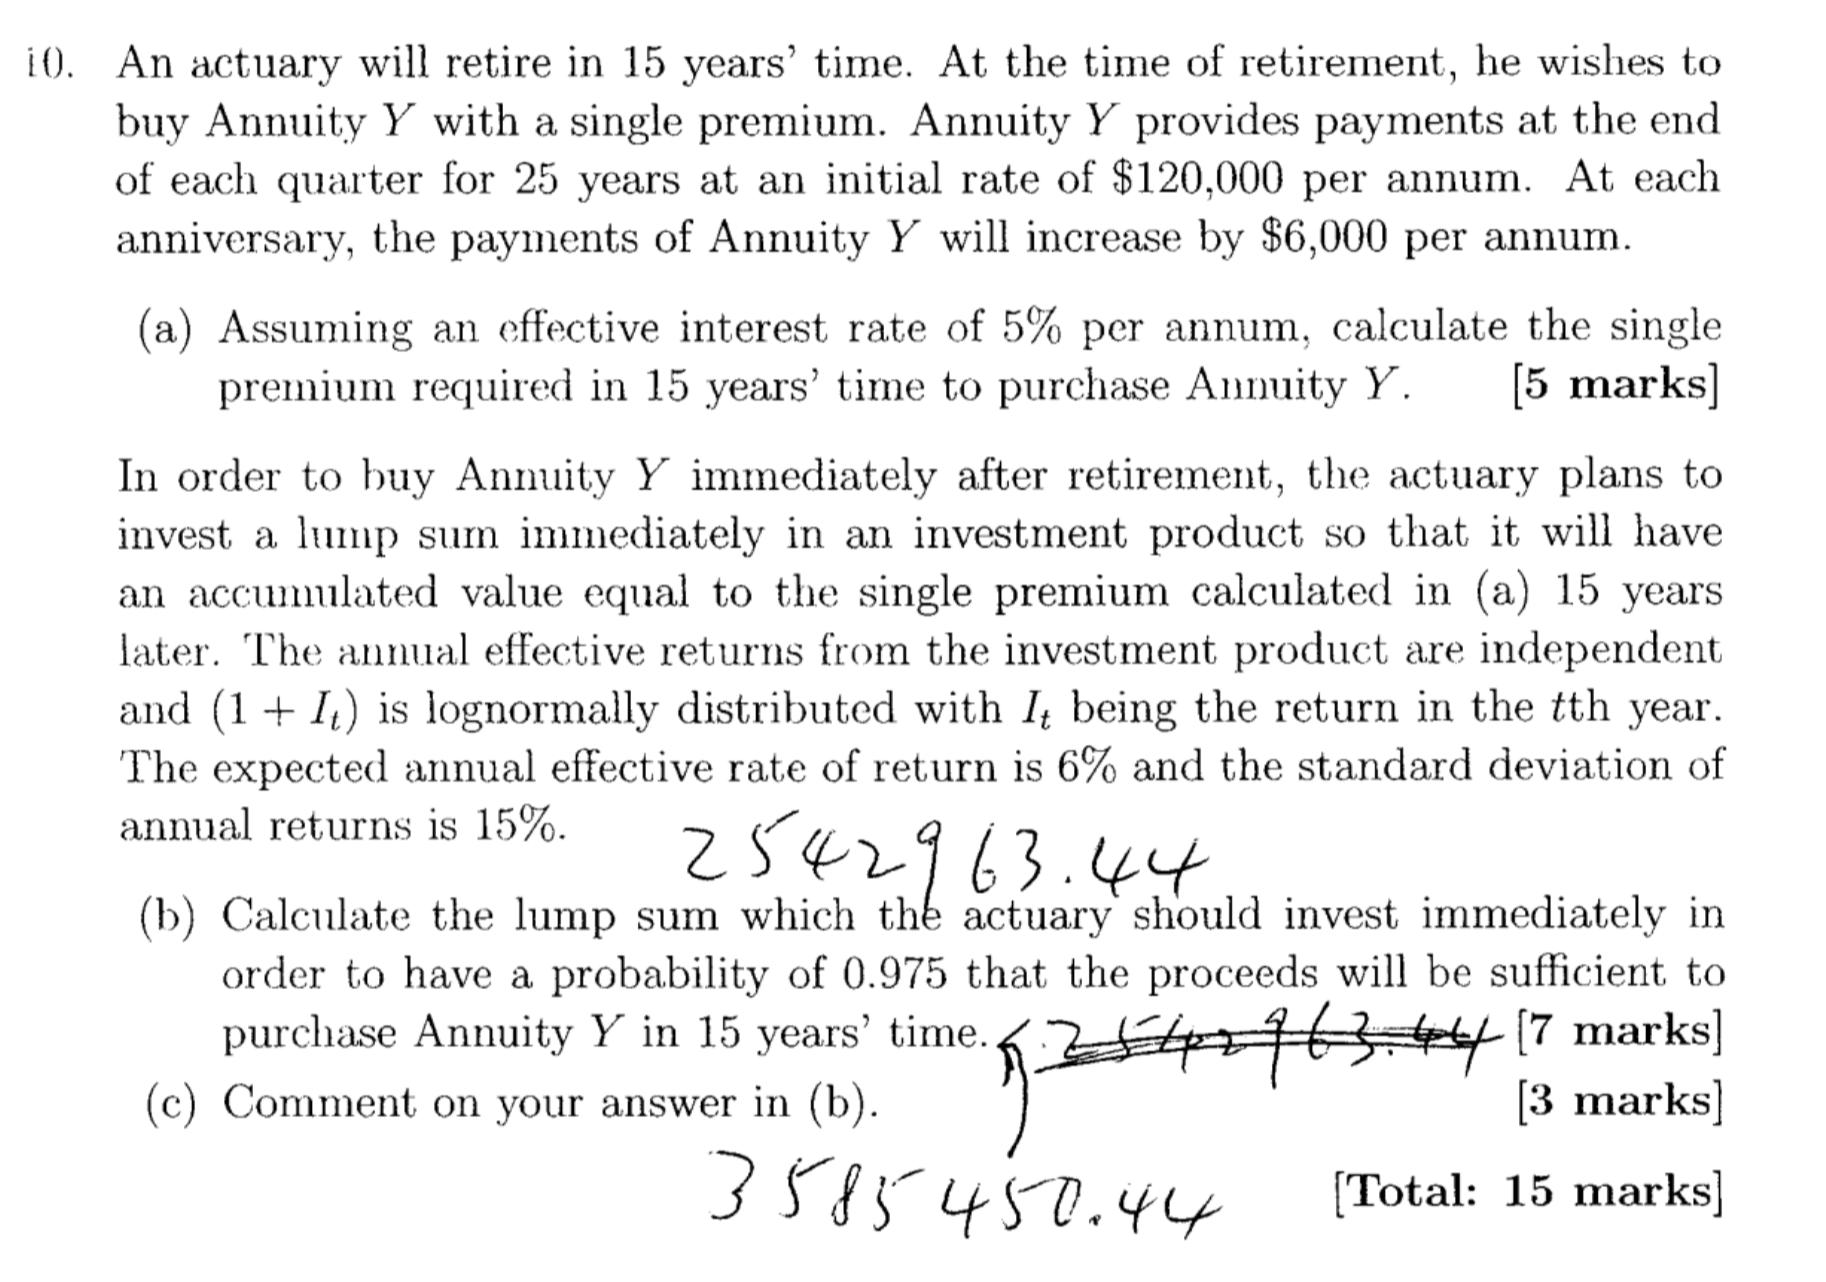 An actuary will retire in 15 years time. At the time of retirement, he wishes to buy Annuity ( Y ) with a single premium.